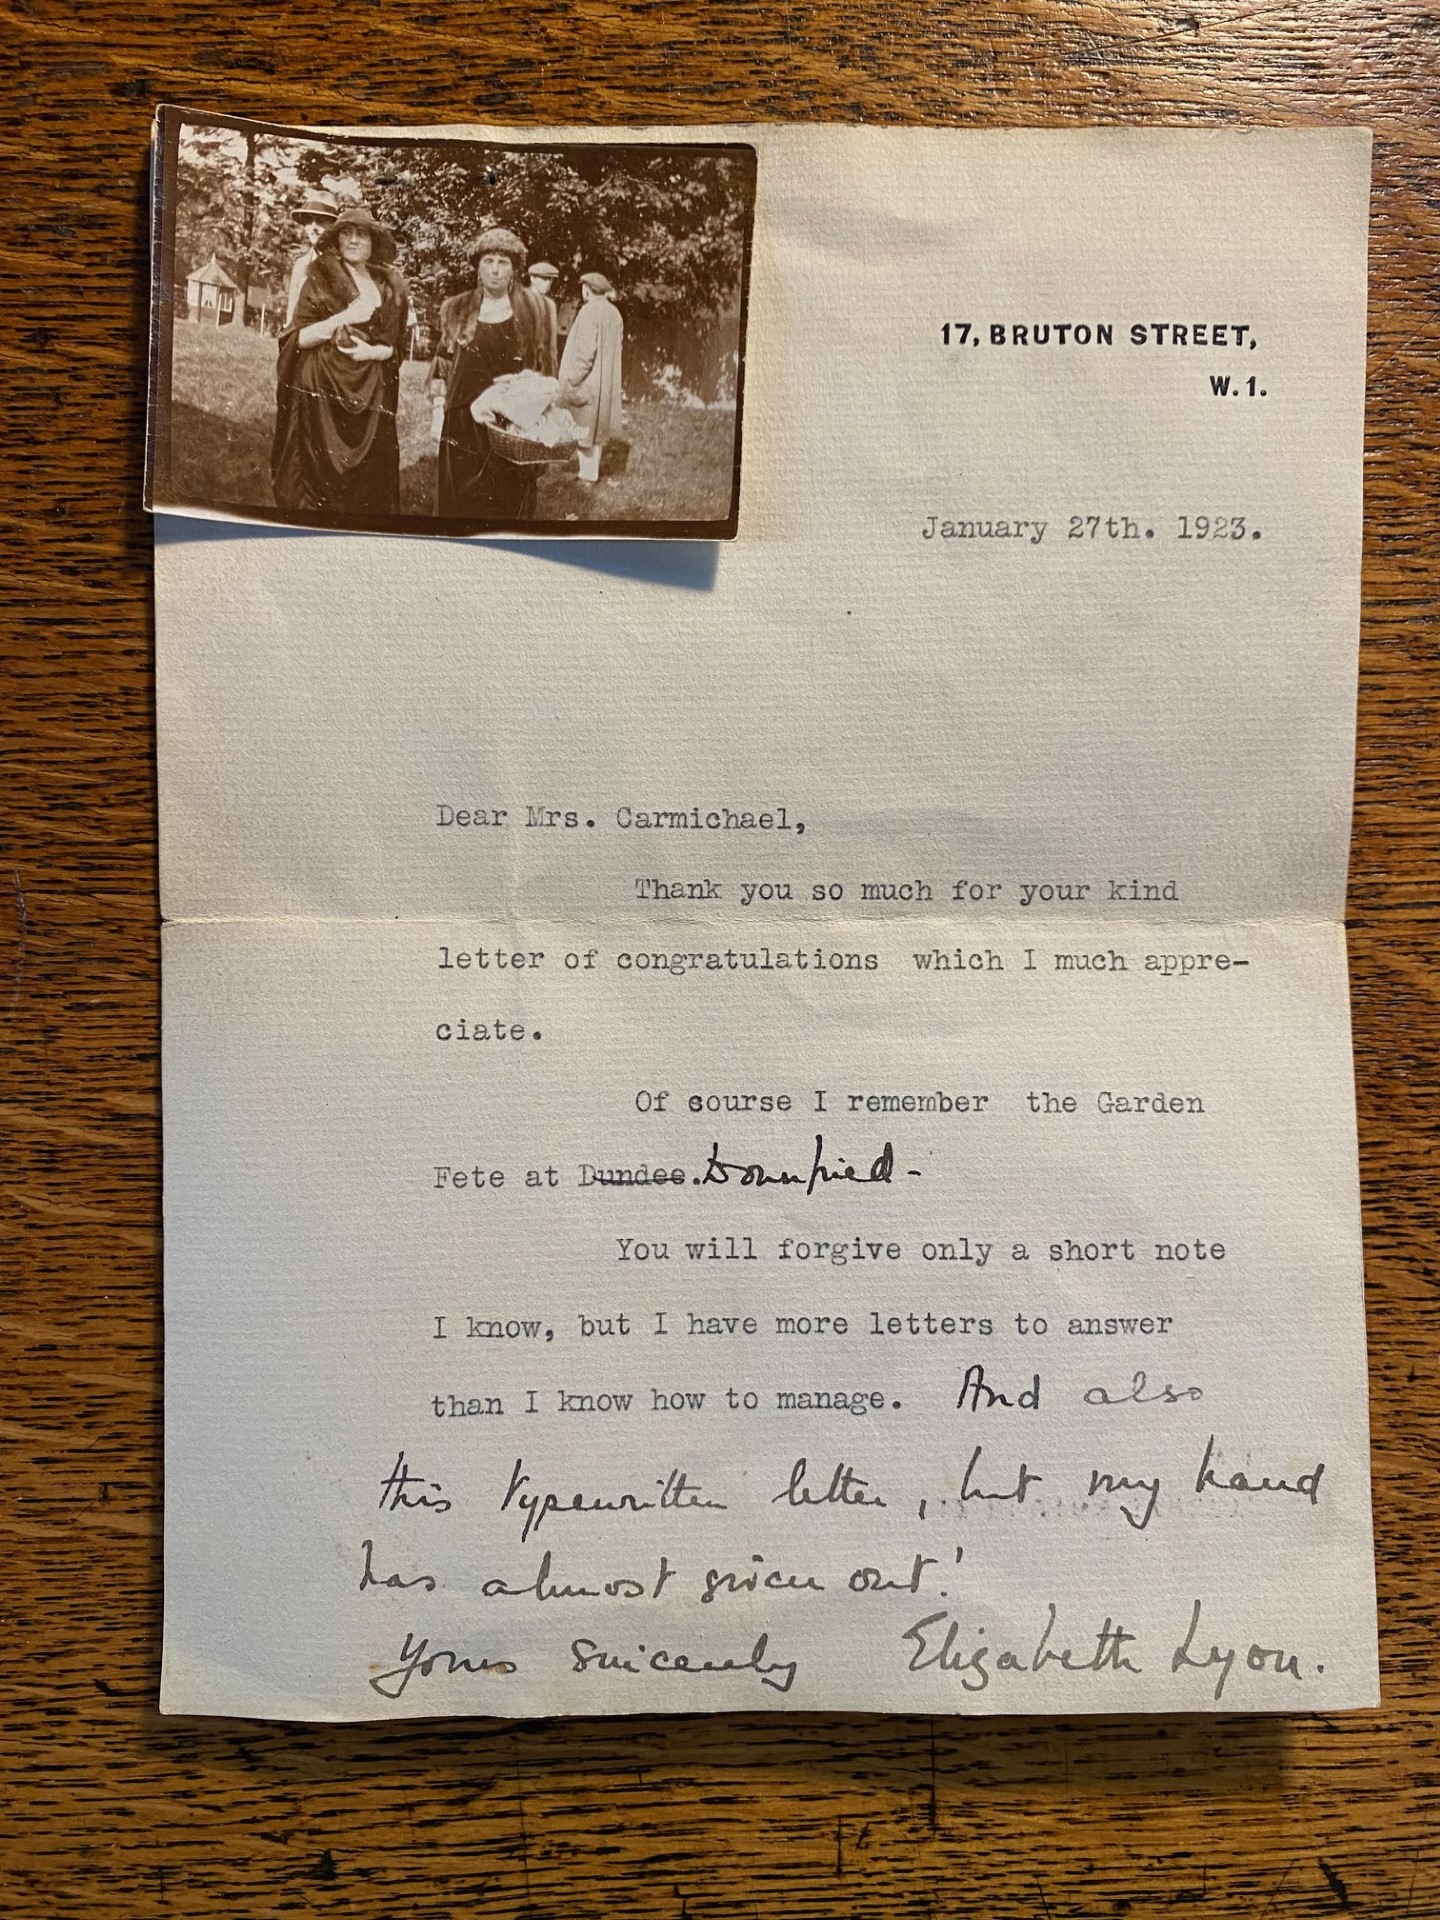 Thank-you letter written by The Queen Mother after her royal engagement in 1923